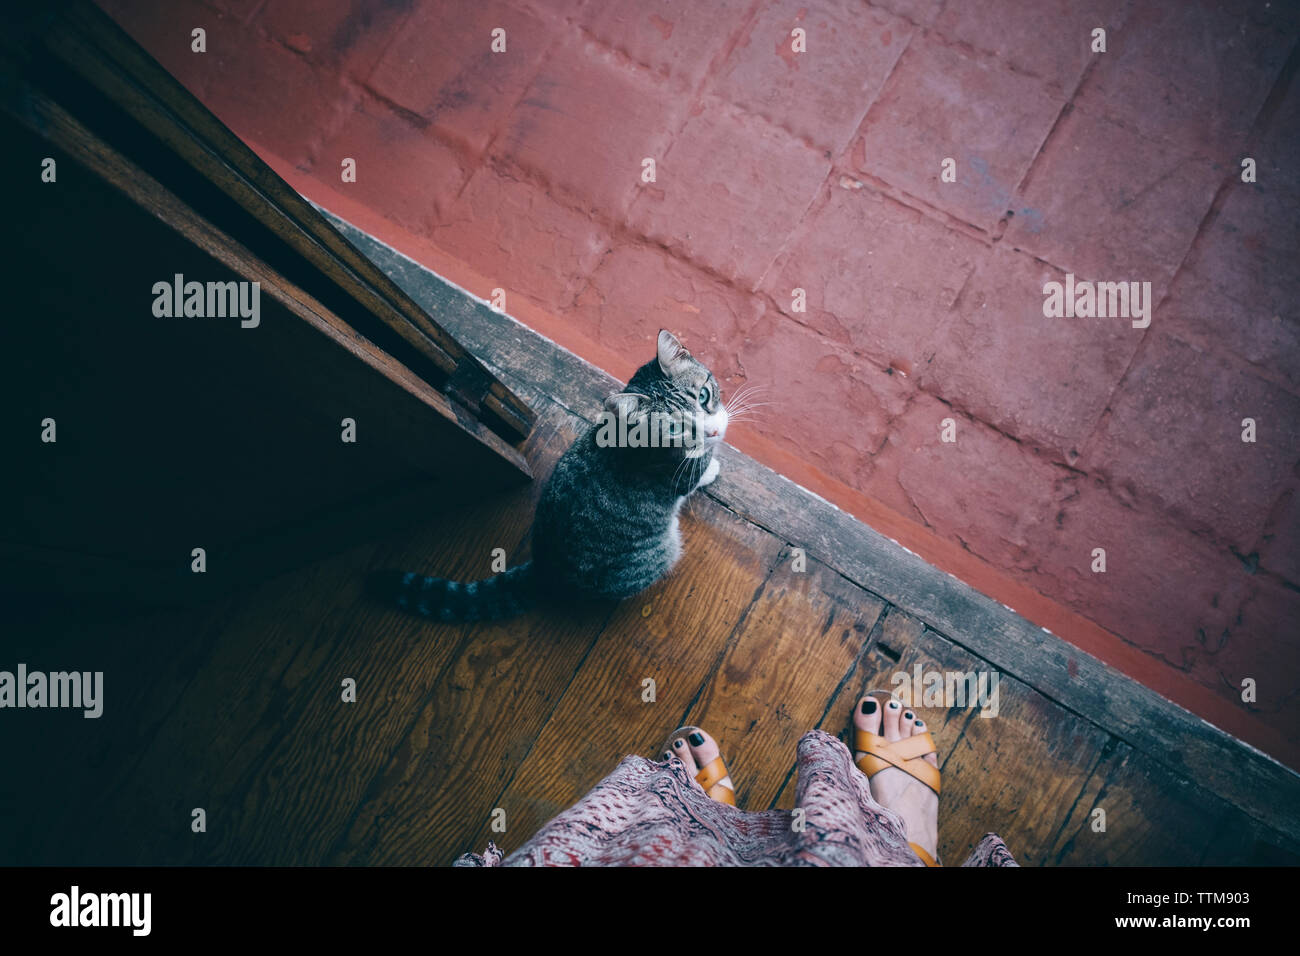 Low section of woman by cat standing on wooden floor Stock Photo